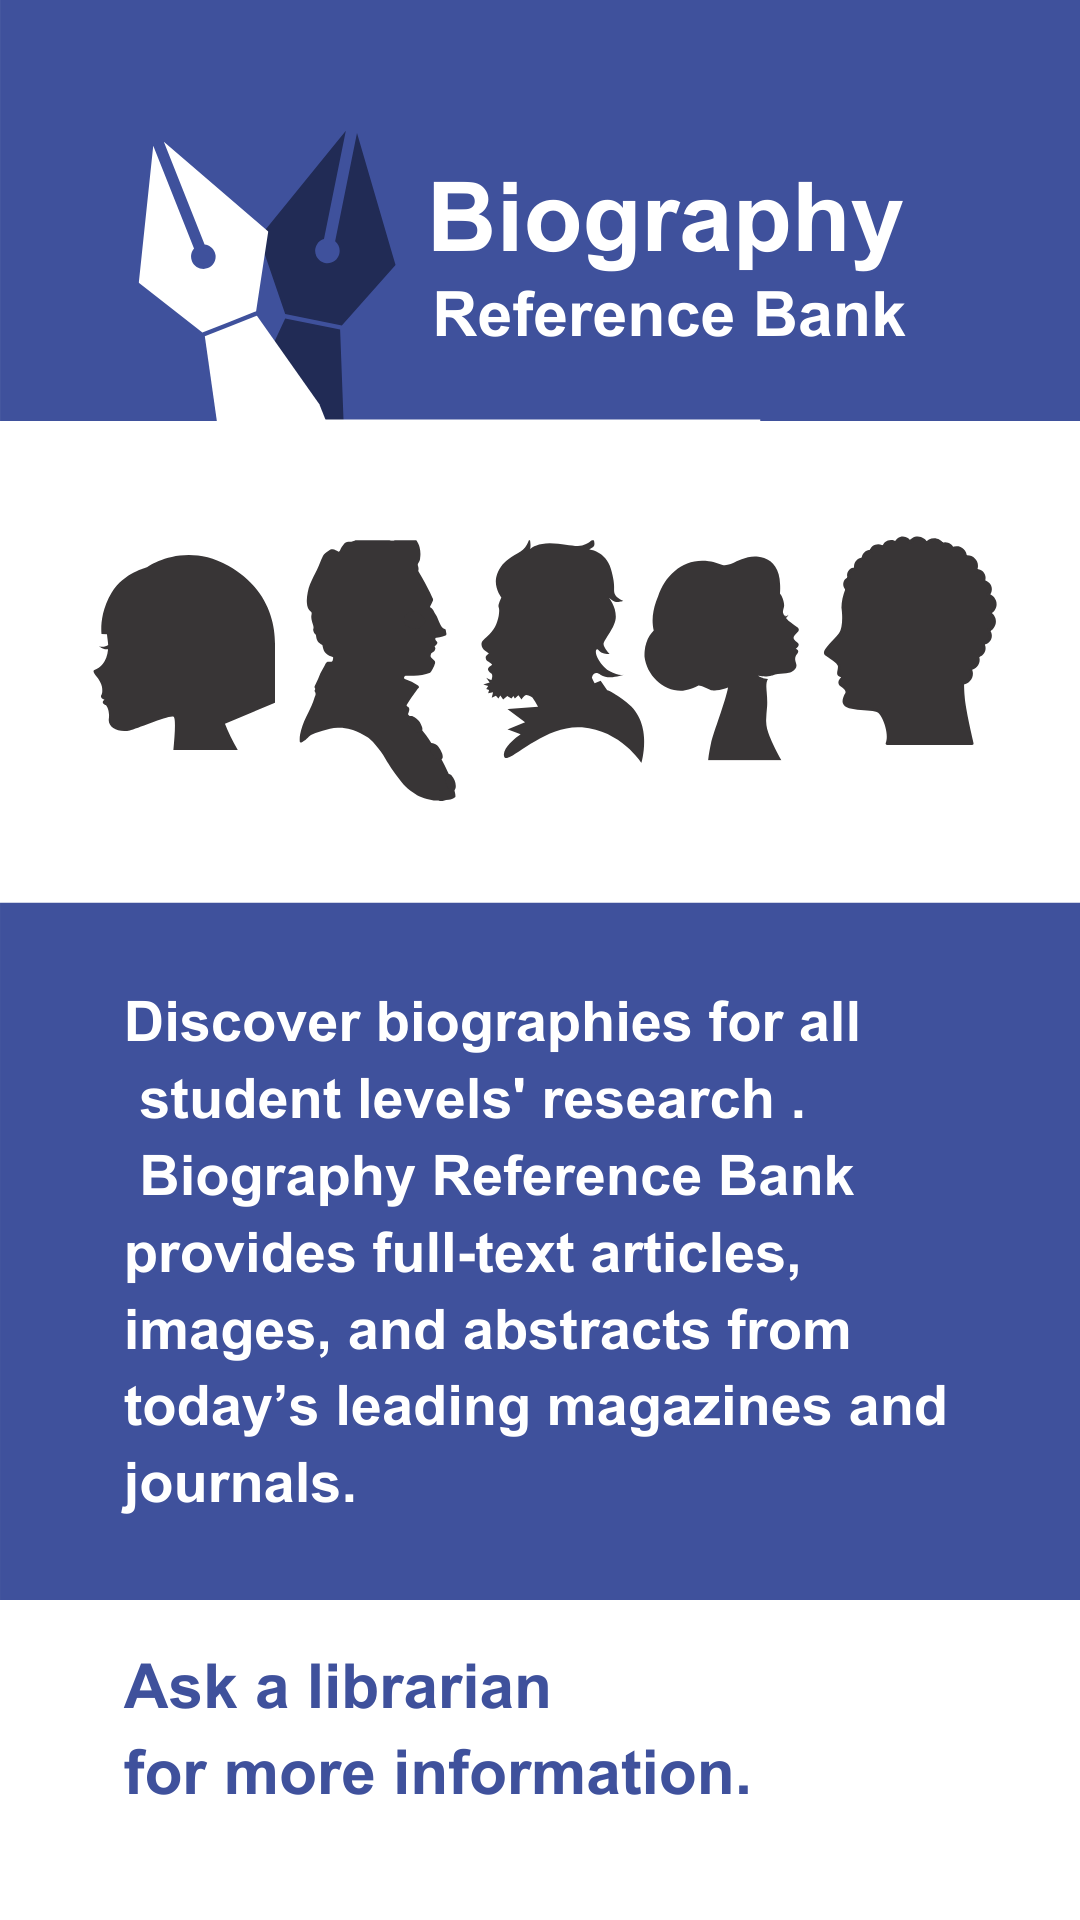 Image promoting Biography Reference Bank for Instagram Stories